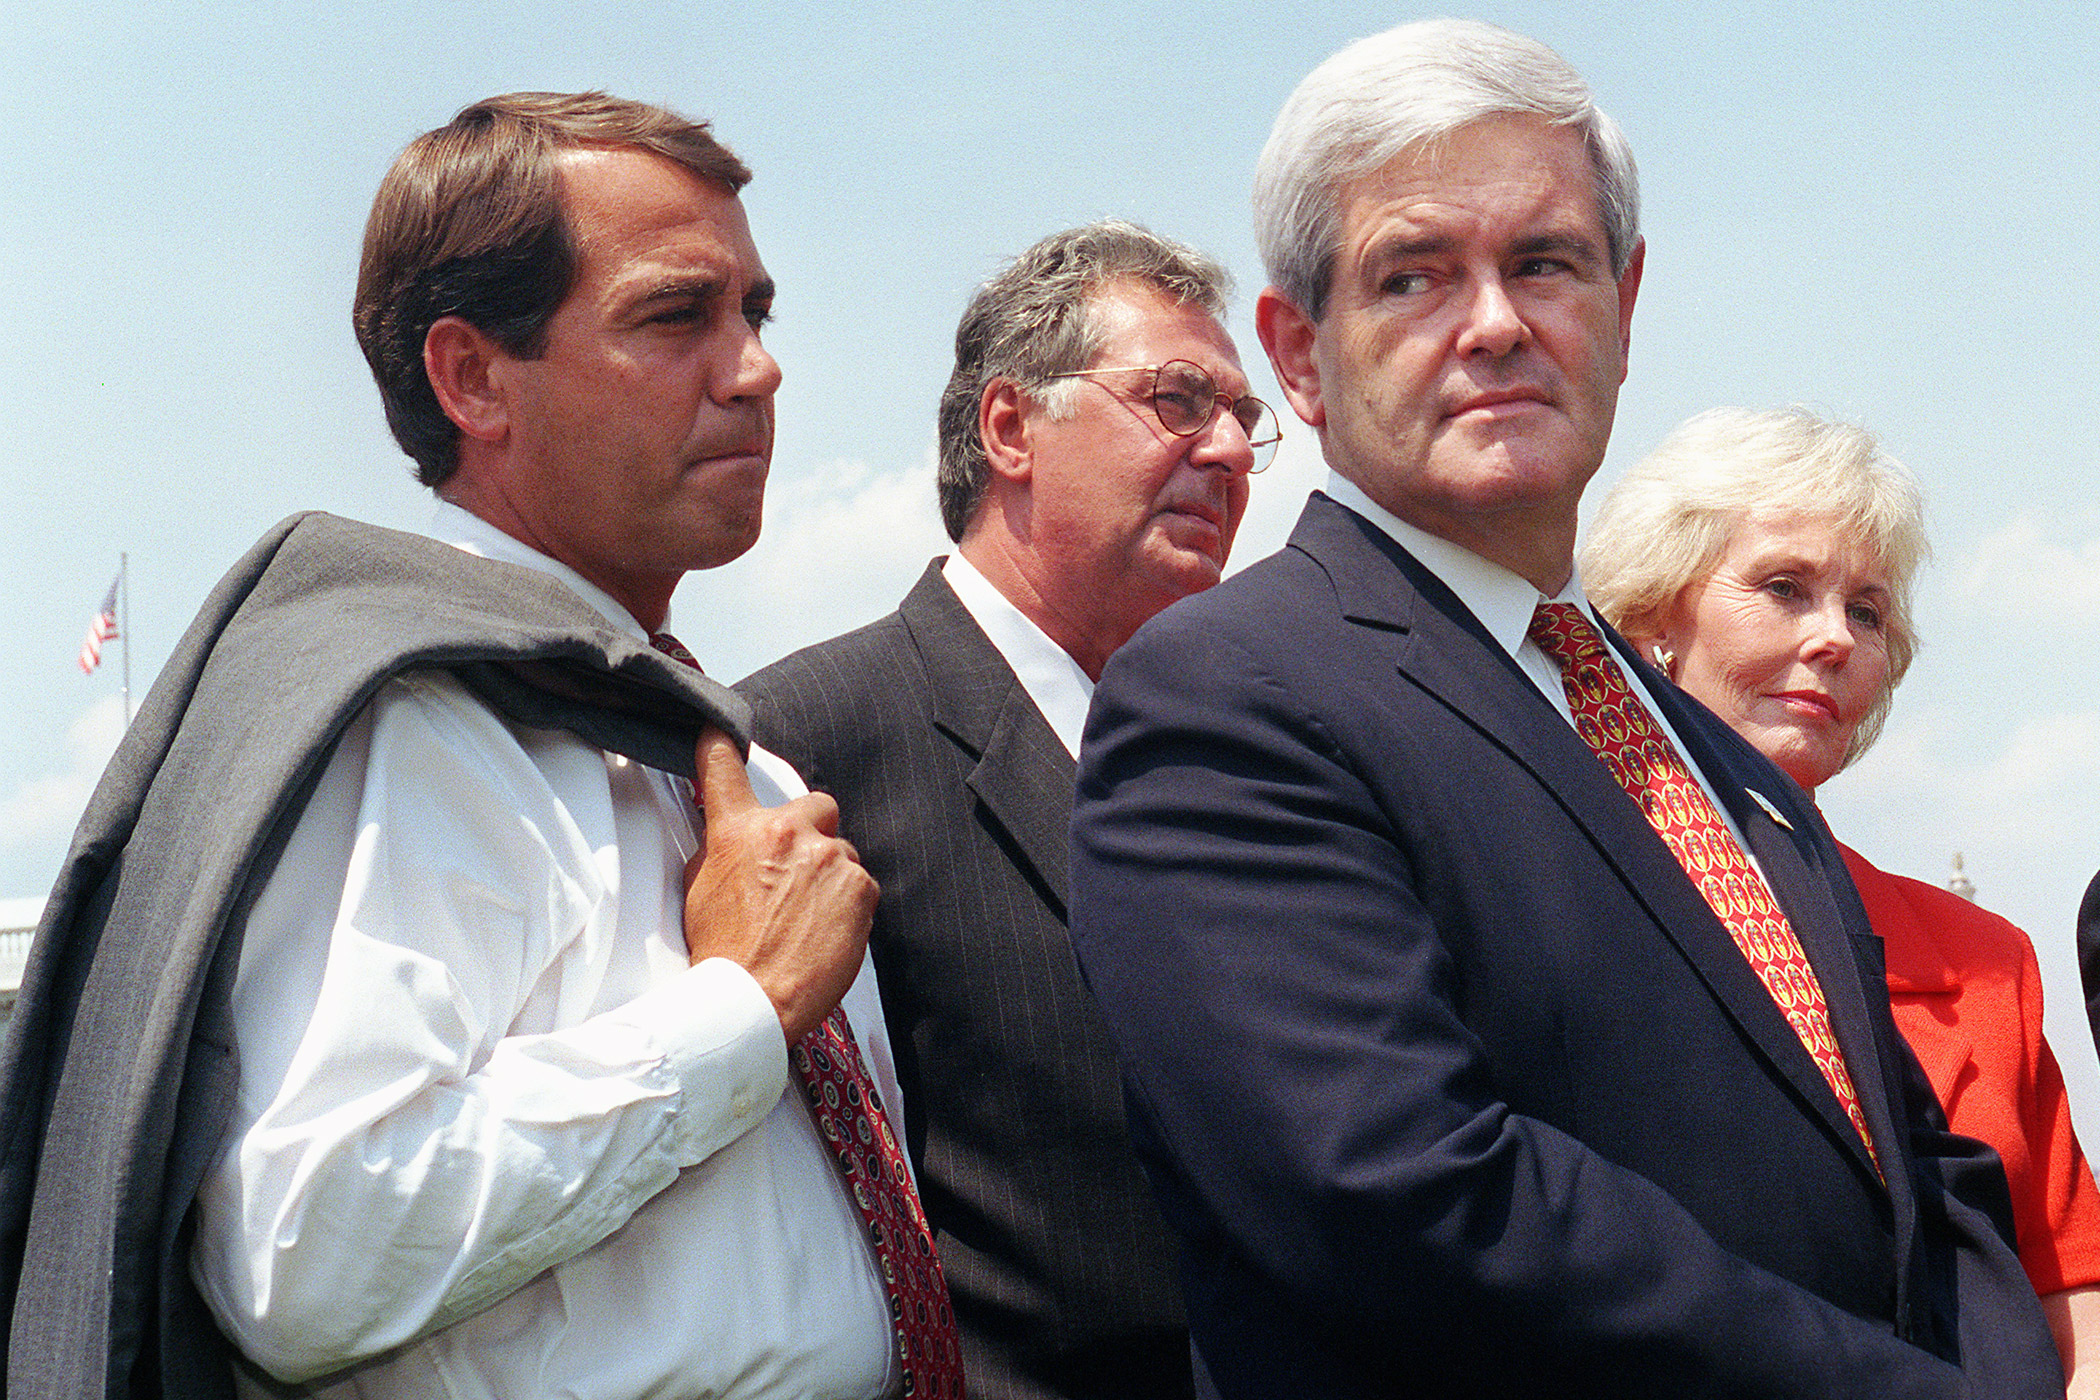 John Boehner stands with then-House Speaker Newt Gingrich at a news conference in 1997.